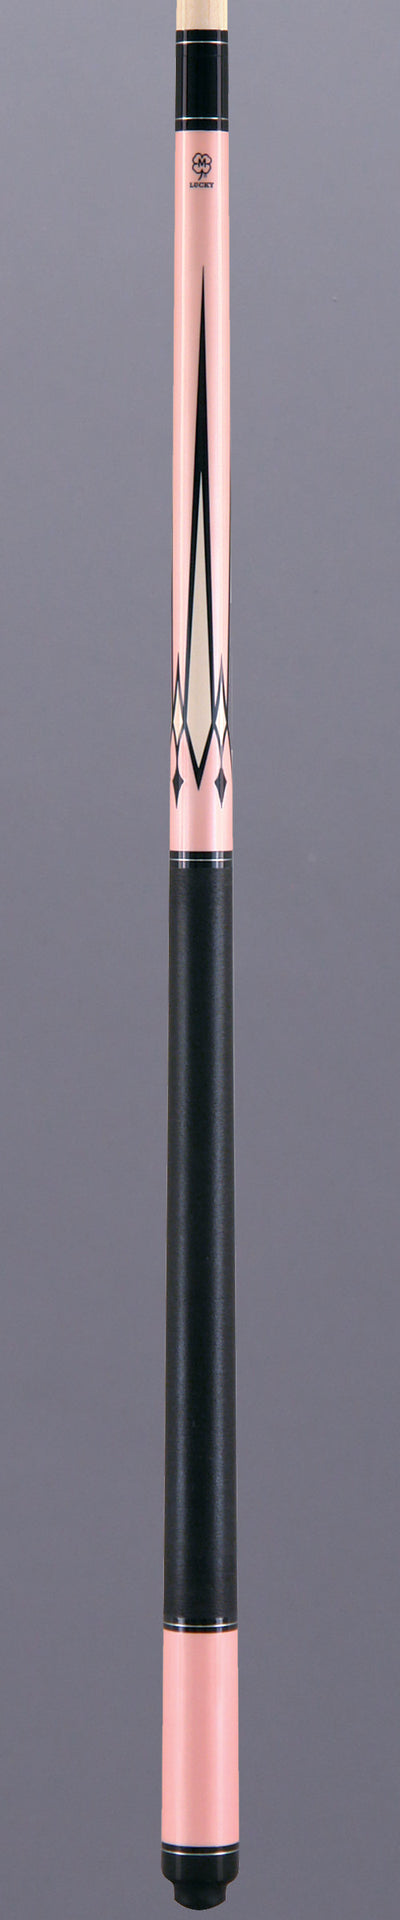 Lucky L17  Pink 4 Point Cue